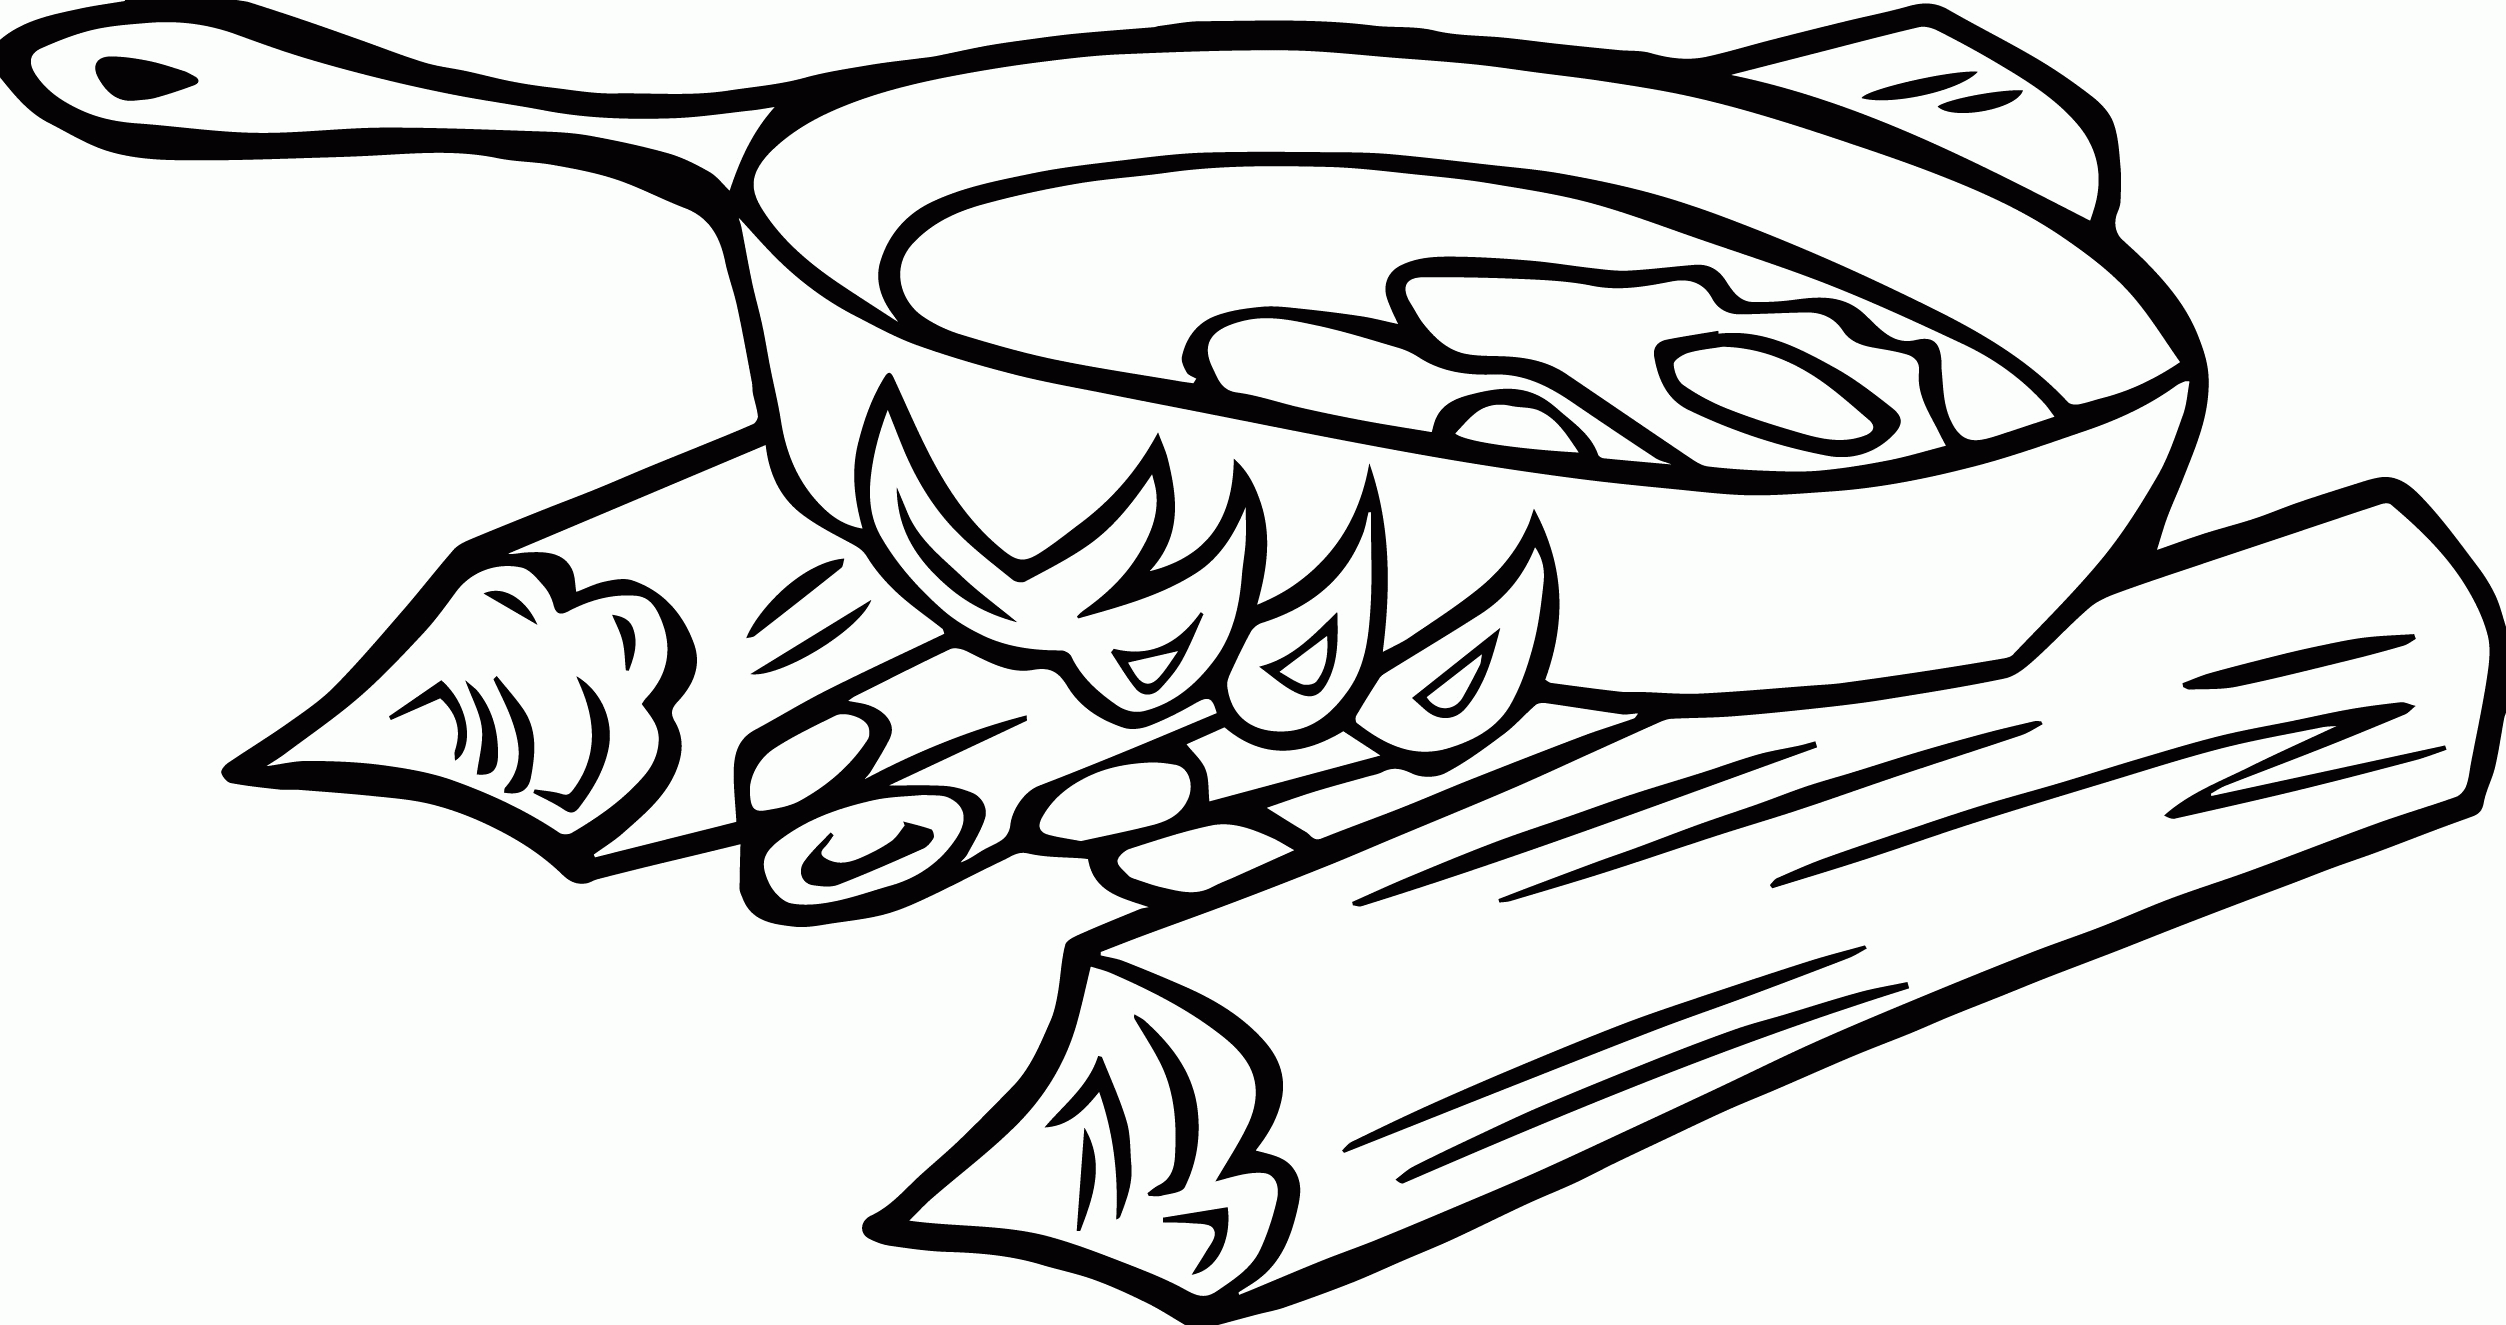 Free Cooking Coloring Page, Download Free Clip Art, Free Clip Art on  Clipart Library